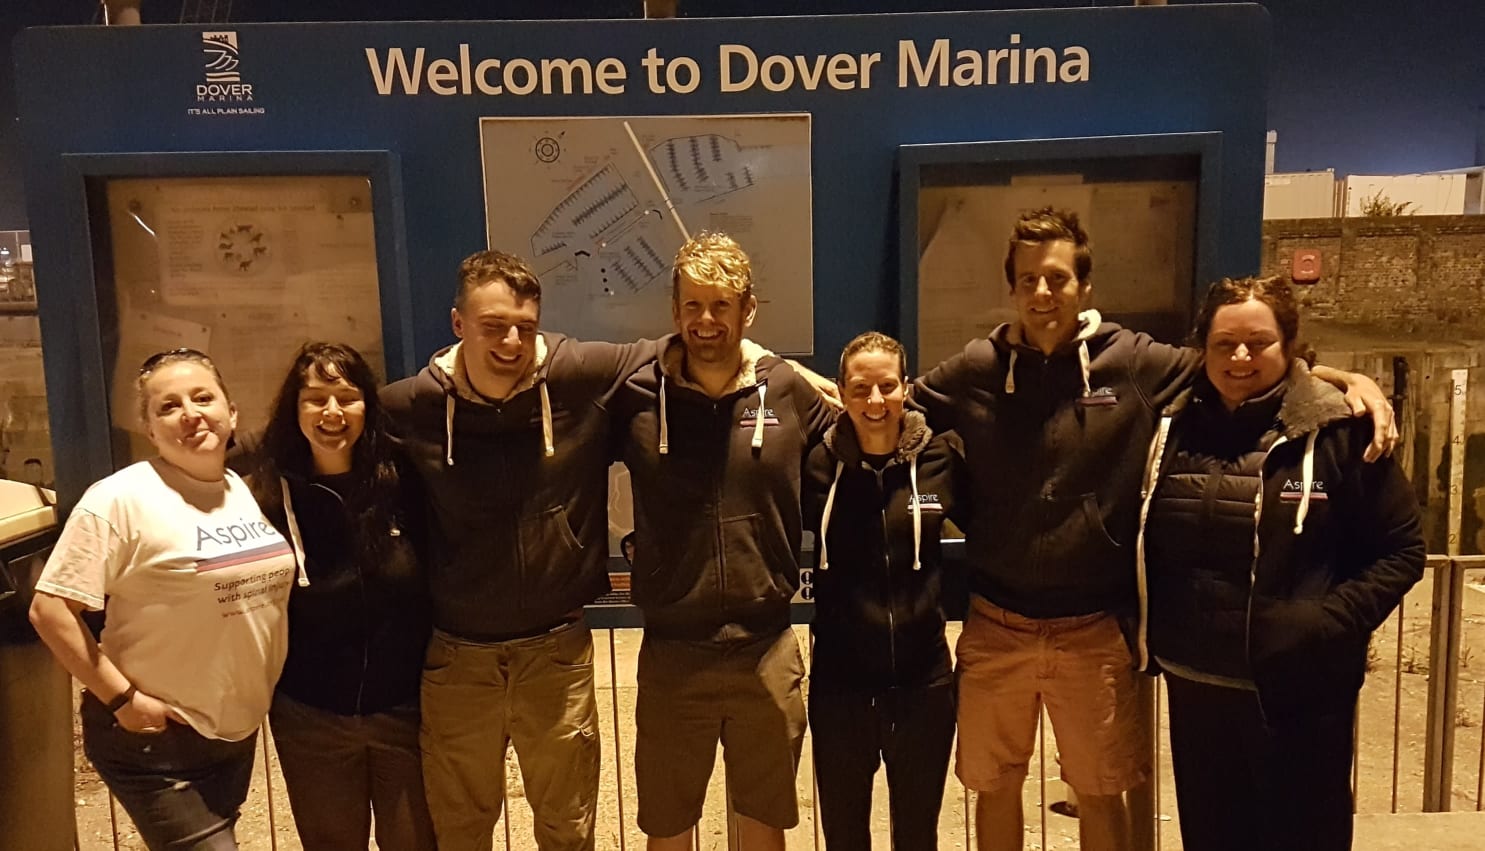 Team Frogfish at Dover Marina ahead of their swim